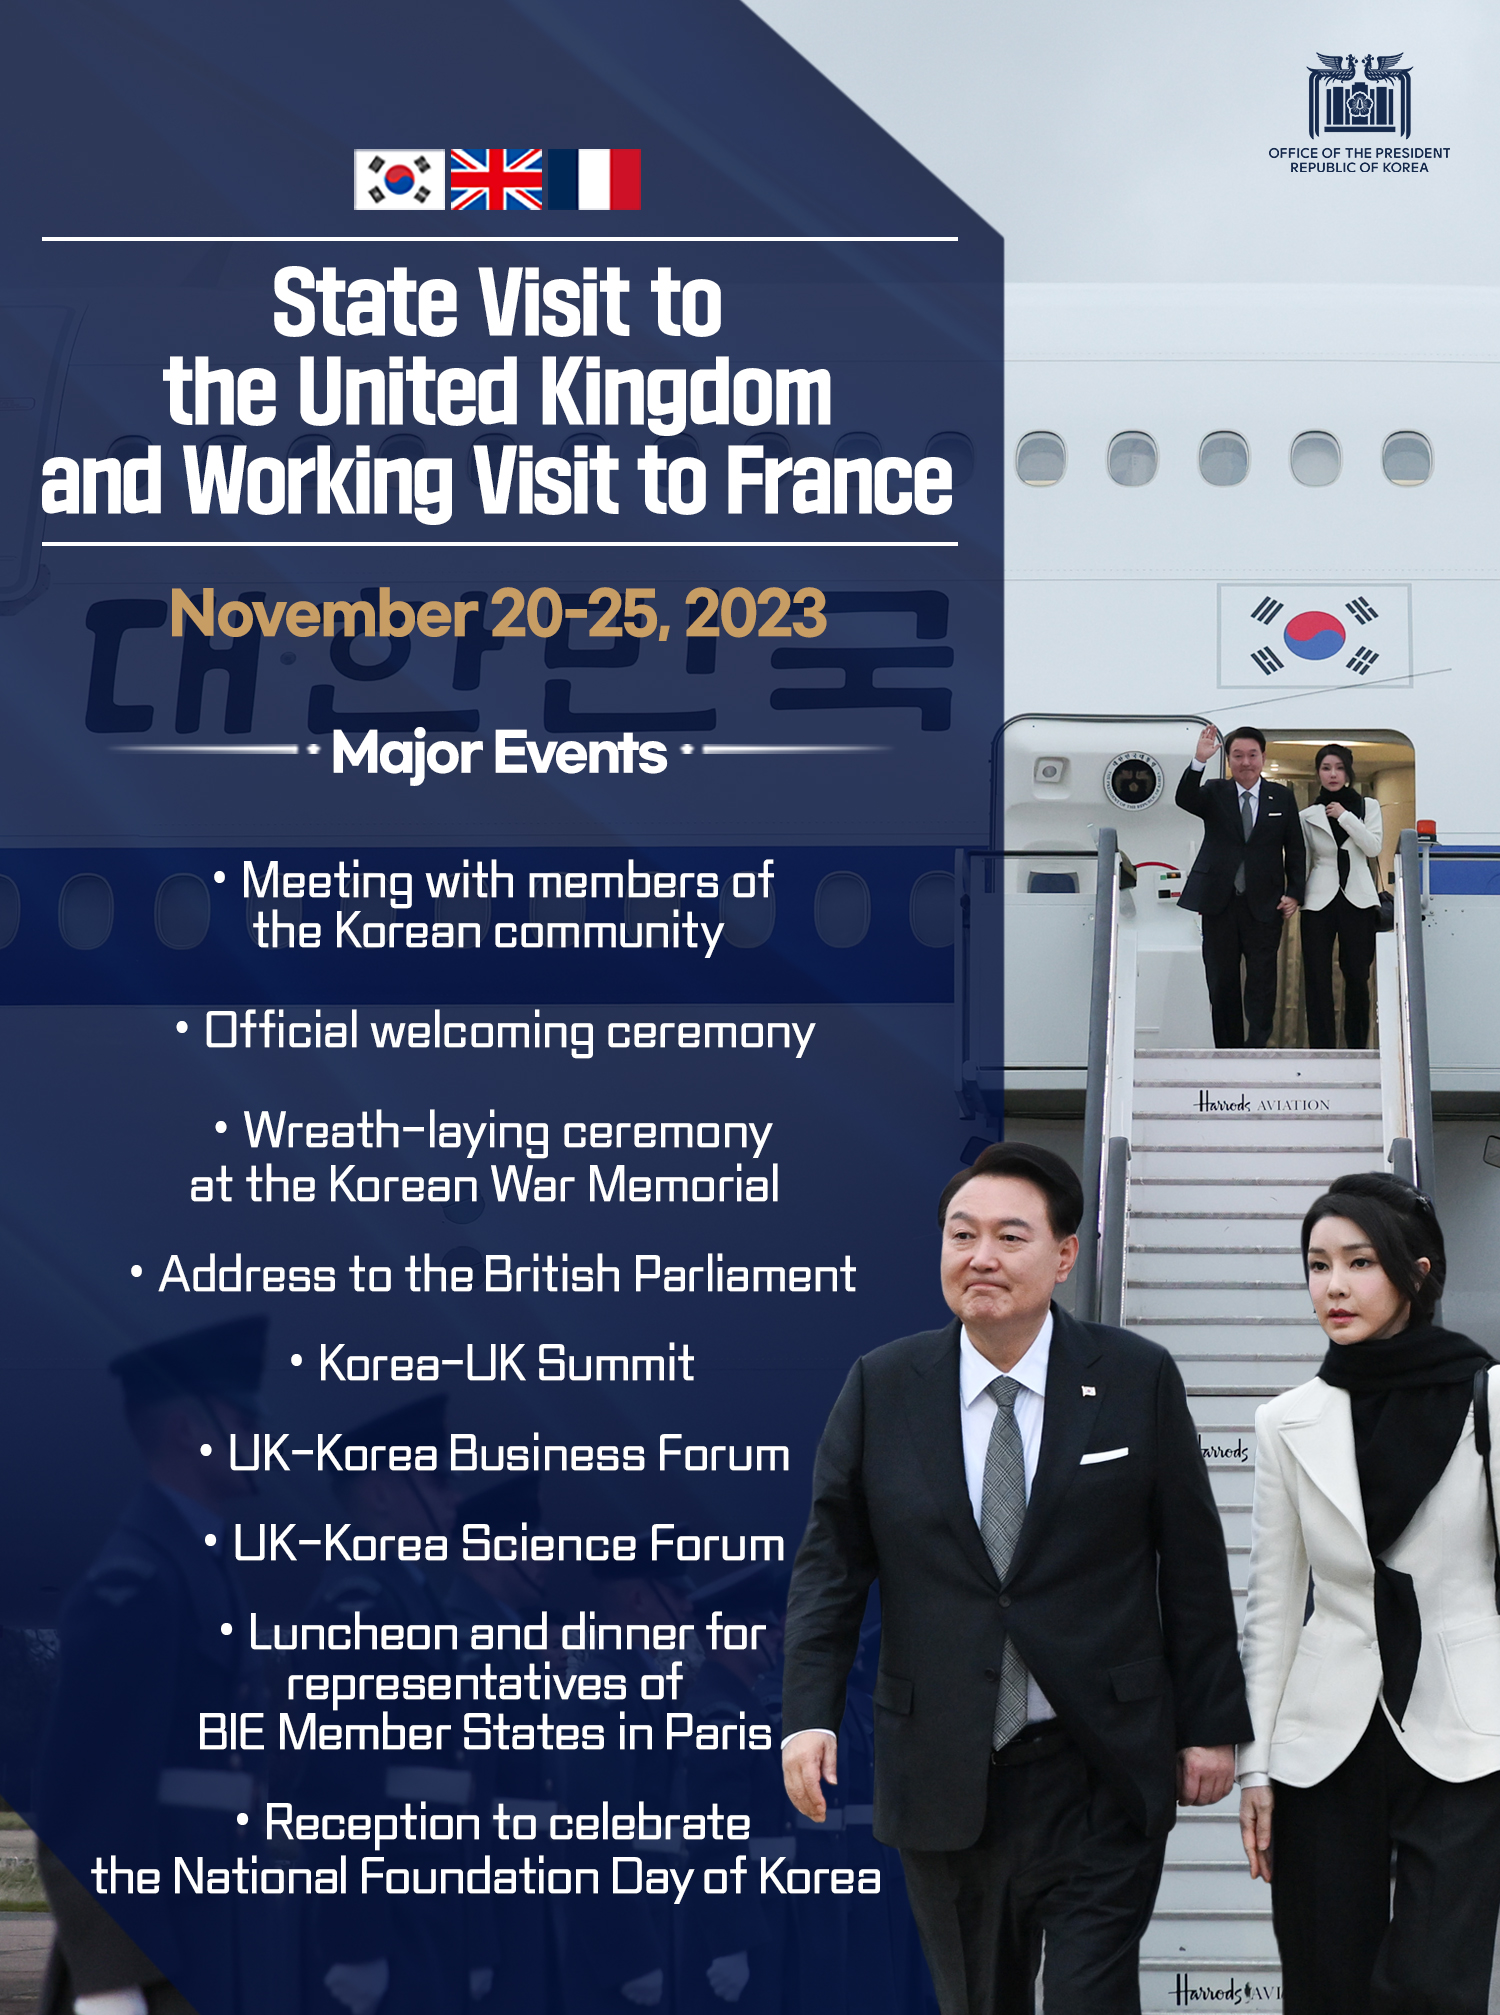 State Visit to the United Kingdom and Working Visit to France